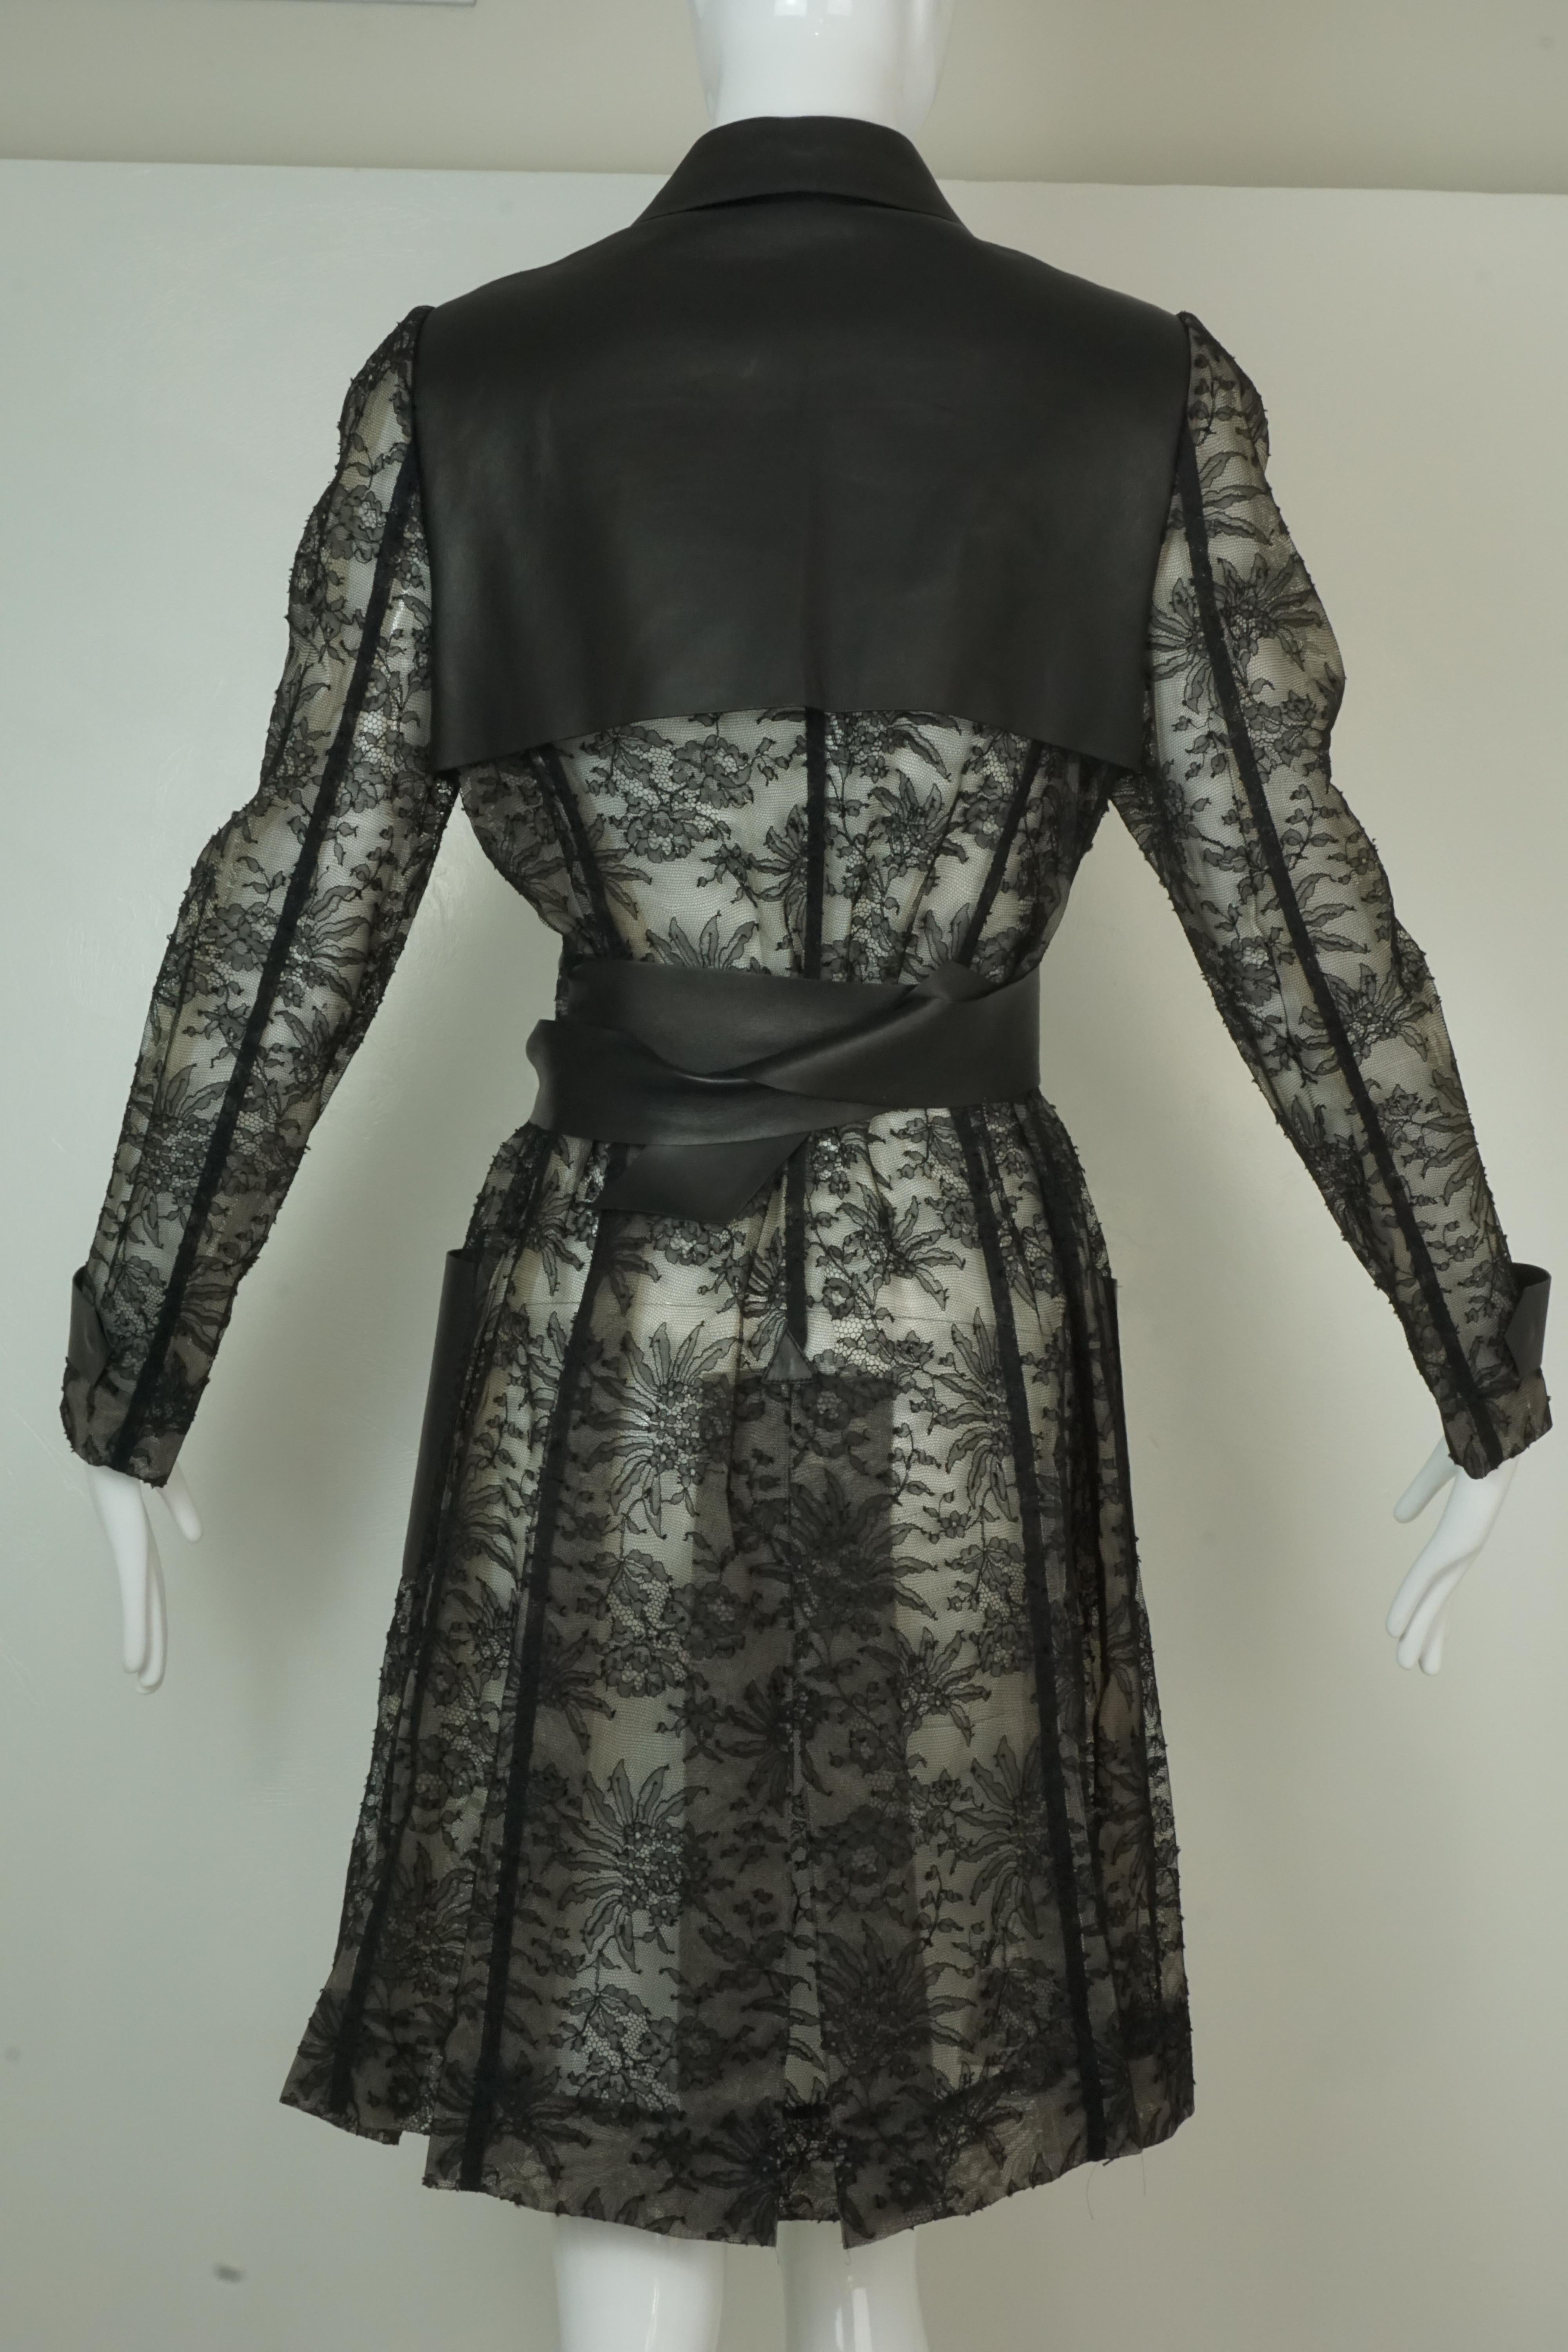 Valentino Black Leather and Lace Trench Coat 2011 6